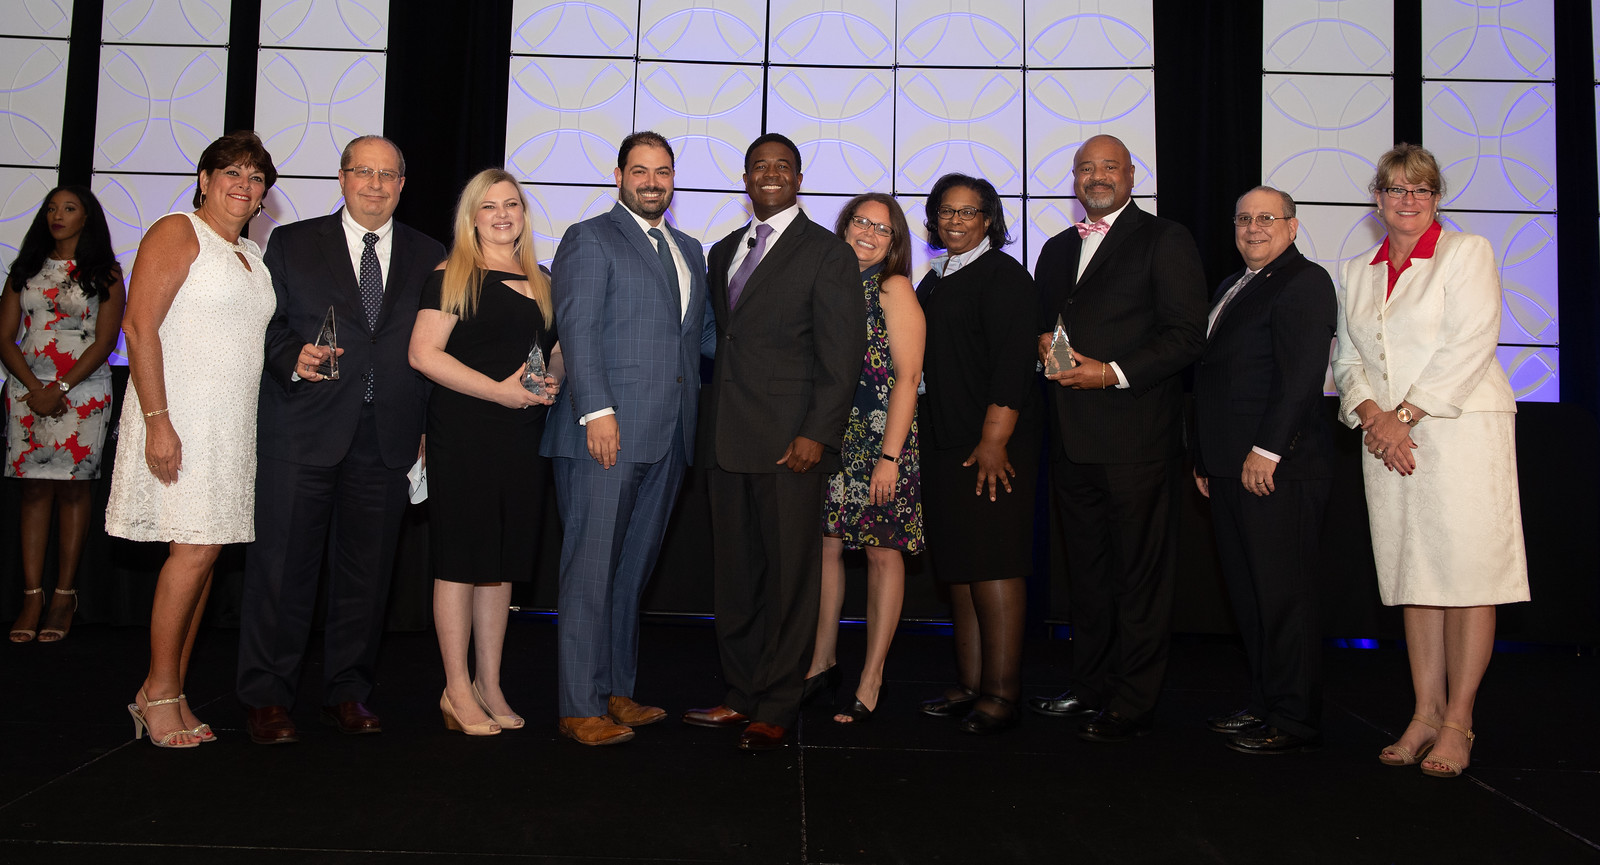 The Nunn-Perry Awards Dinner is held at the Rosen Center Hotel in Orlando, FL., Aug. 16, 2018. (U.S. Army photo by Joseph B. Lawson)